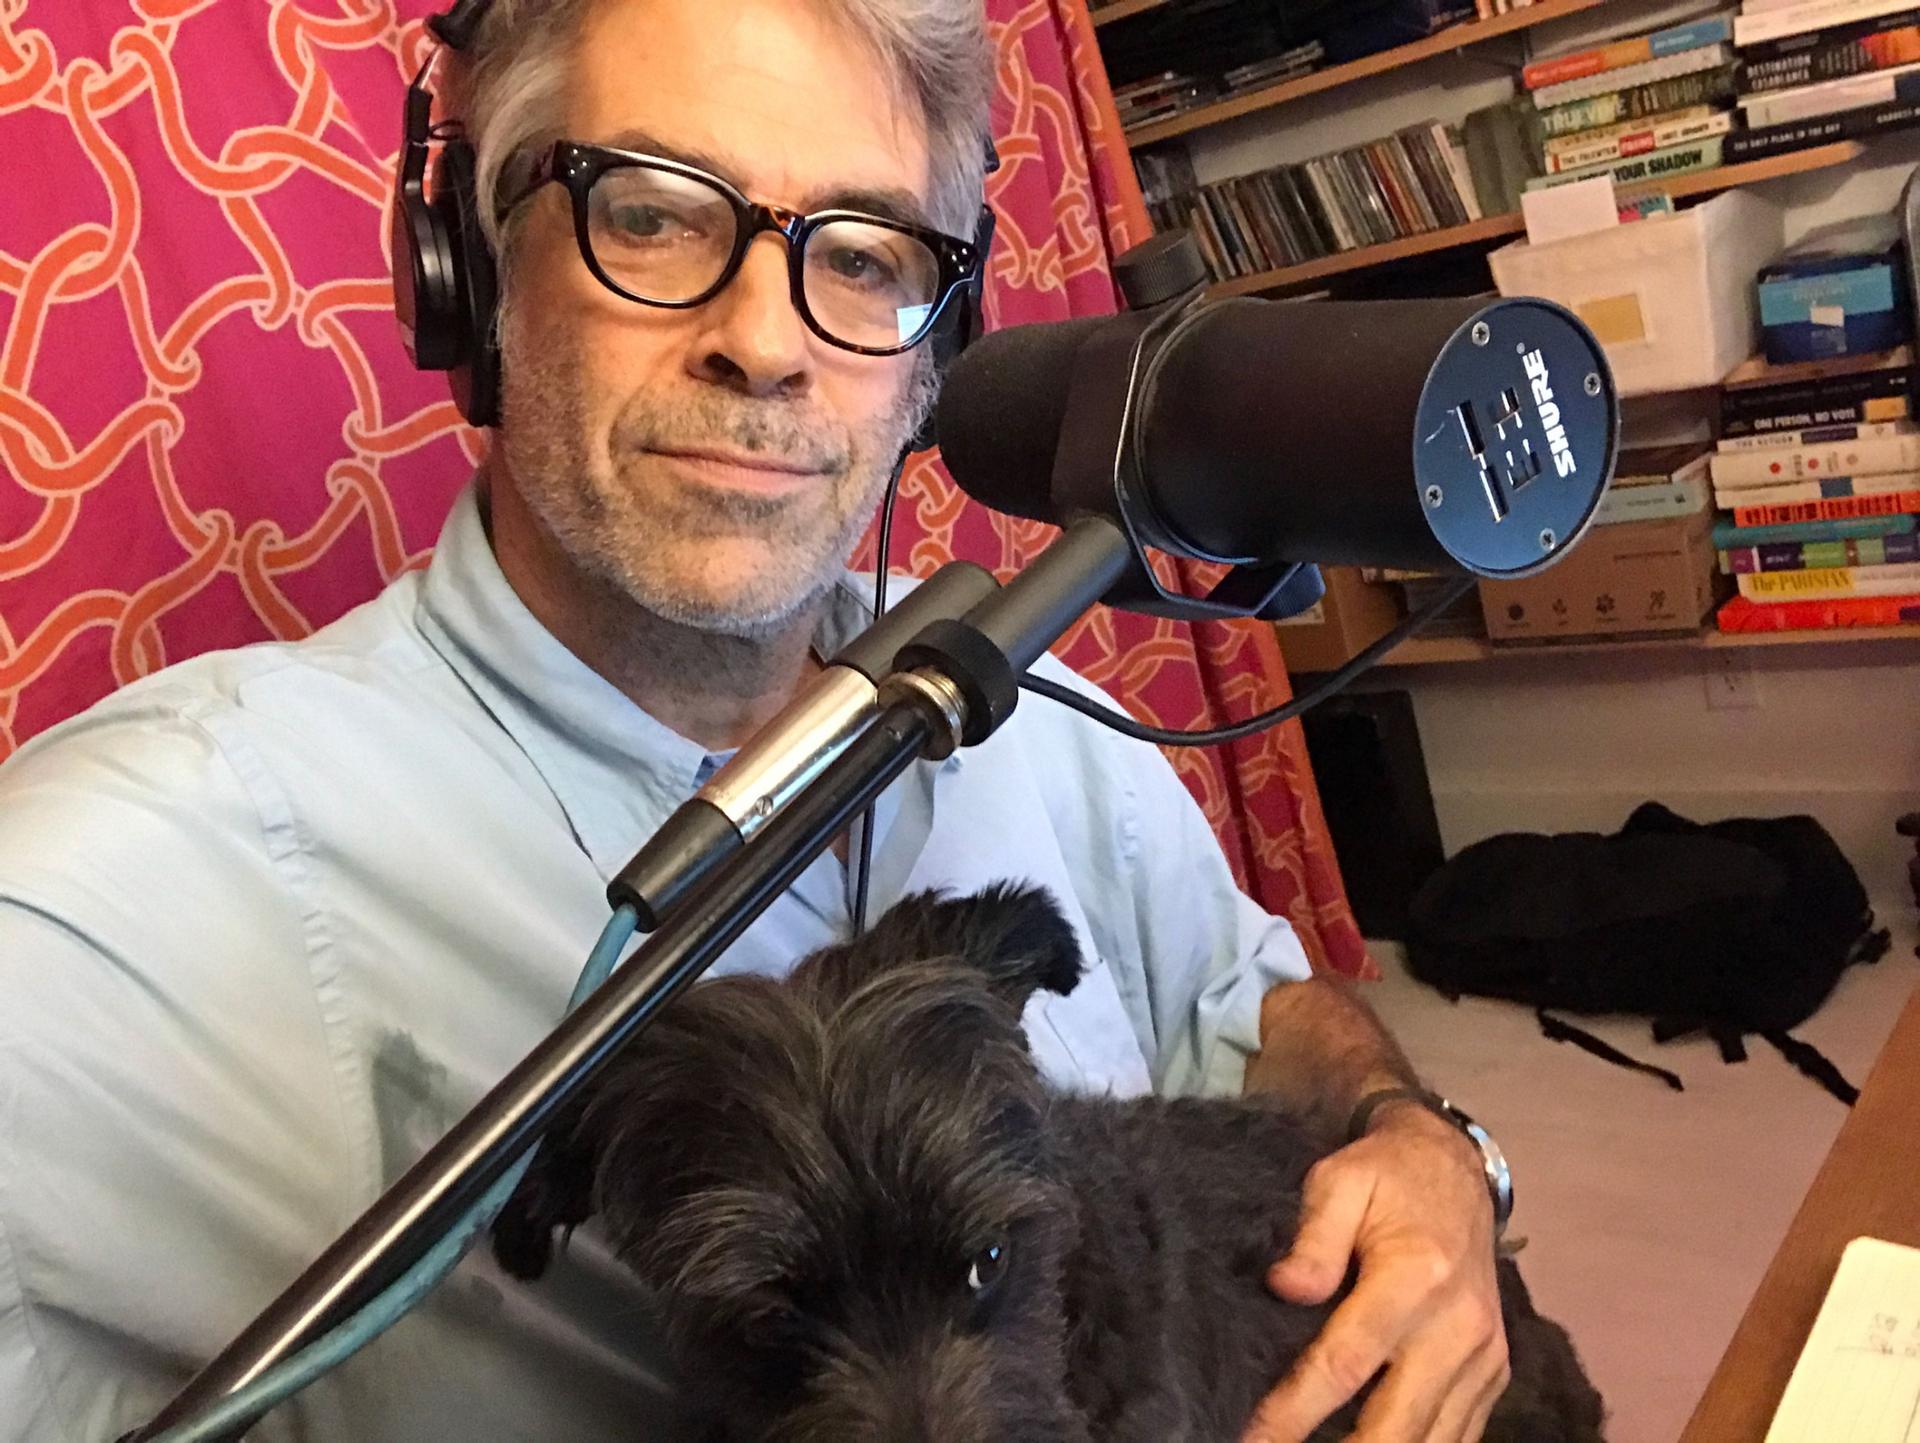 Marco Werman is shown with a microphone and his dog Frankie sitting on his lap.